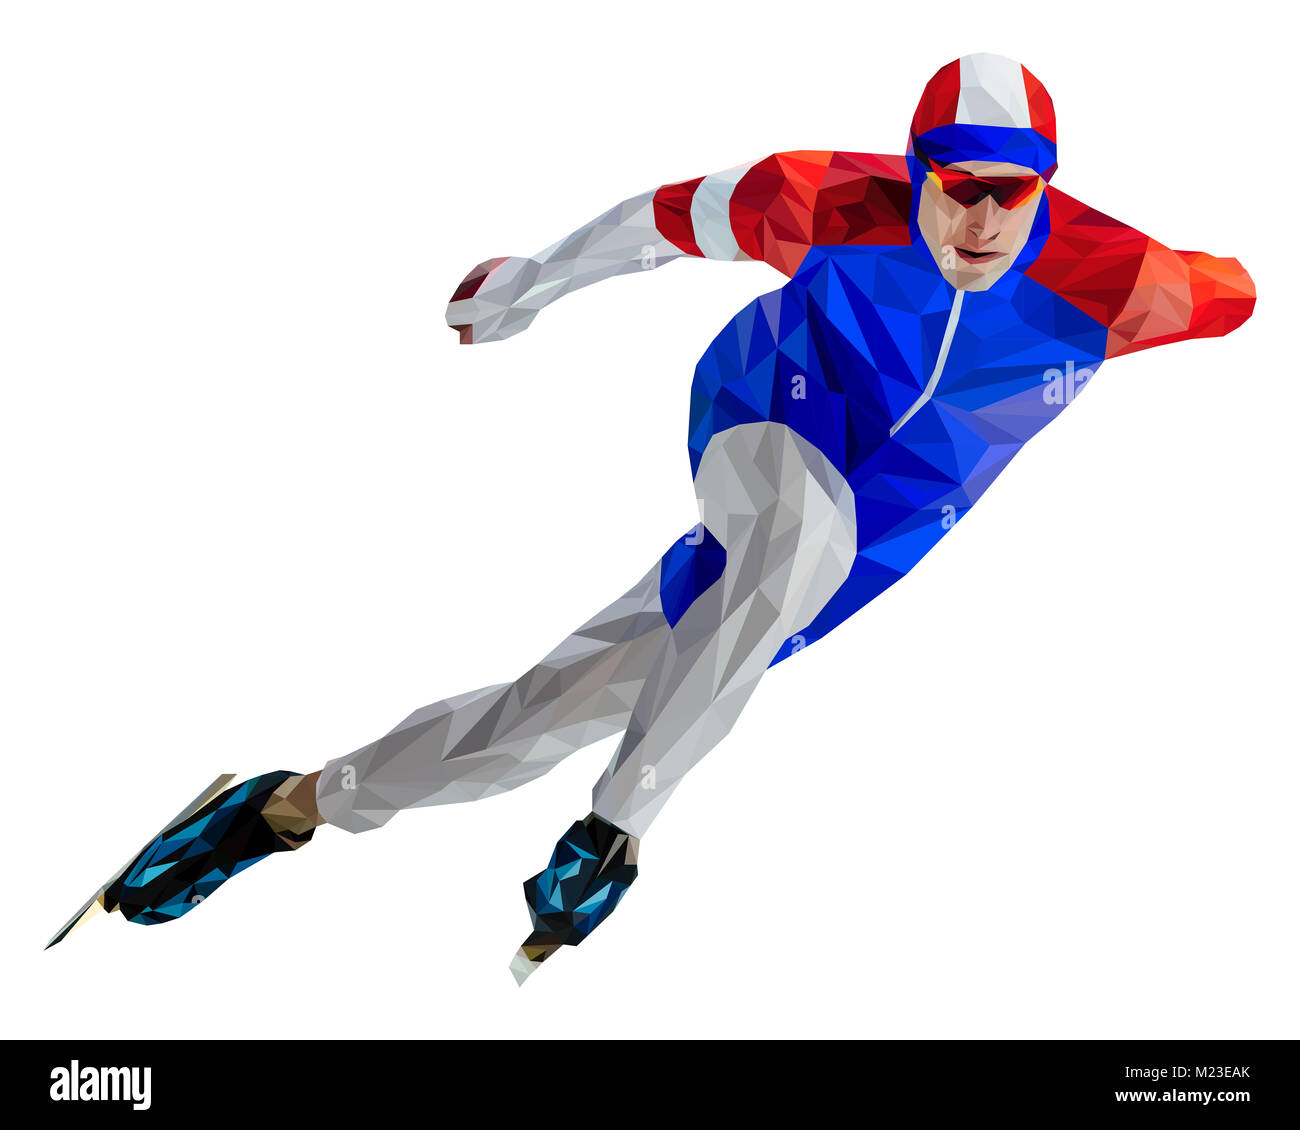 athlete skater in speed skating low poly color silhouette Stock Photo